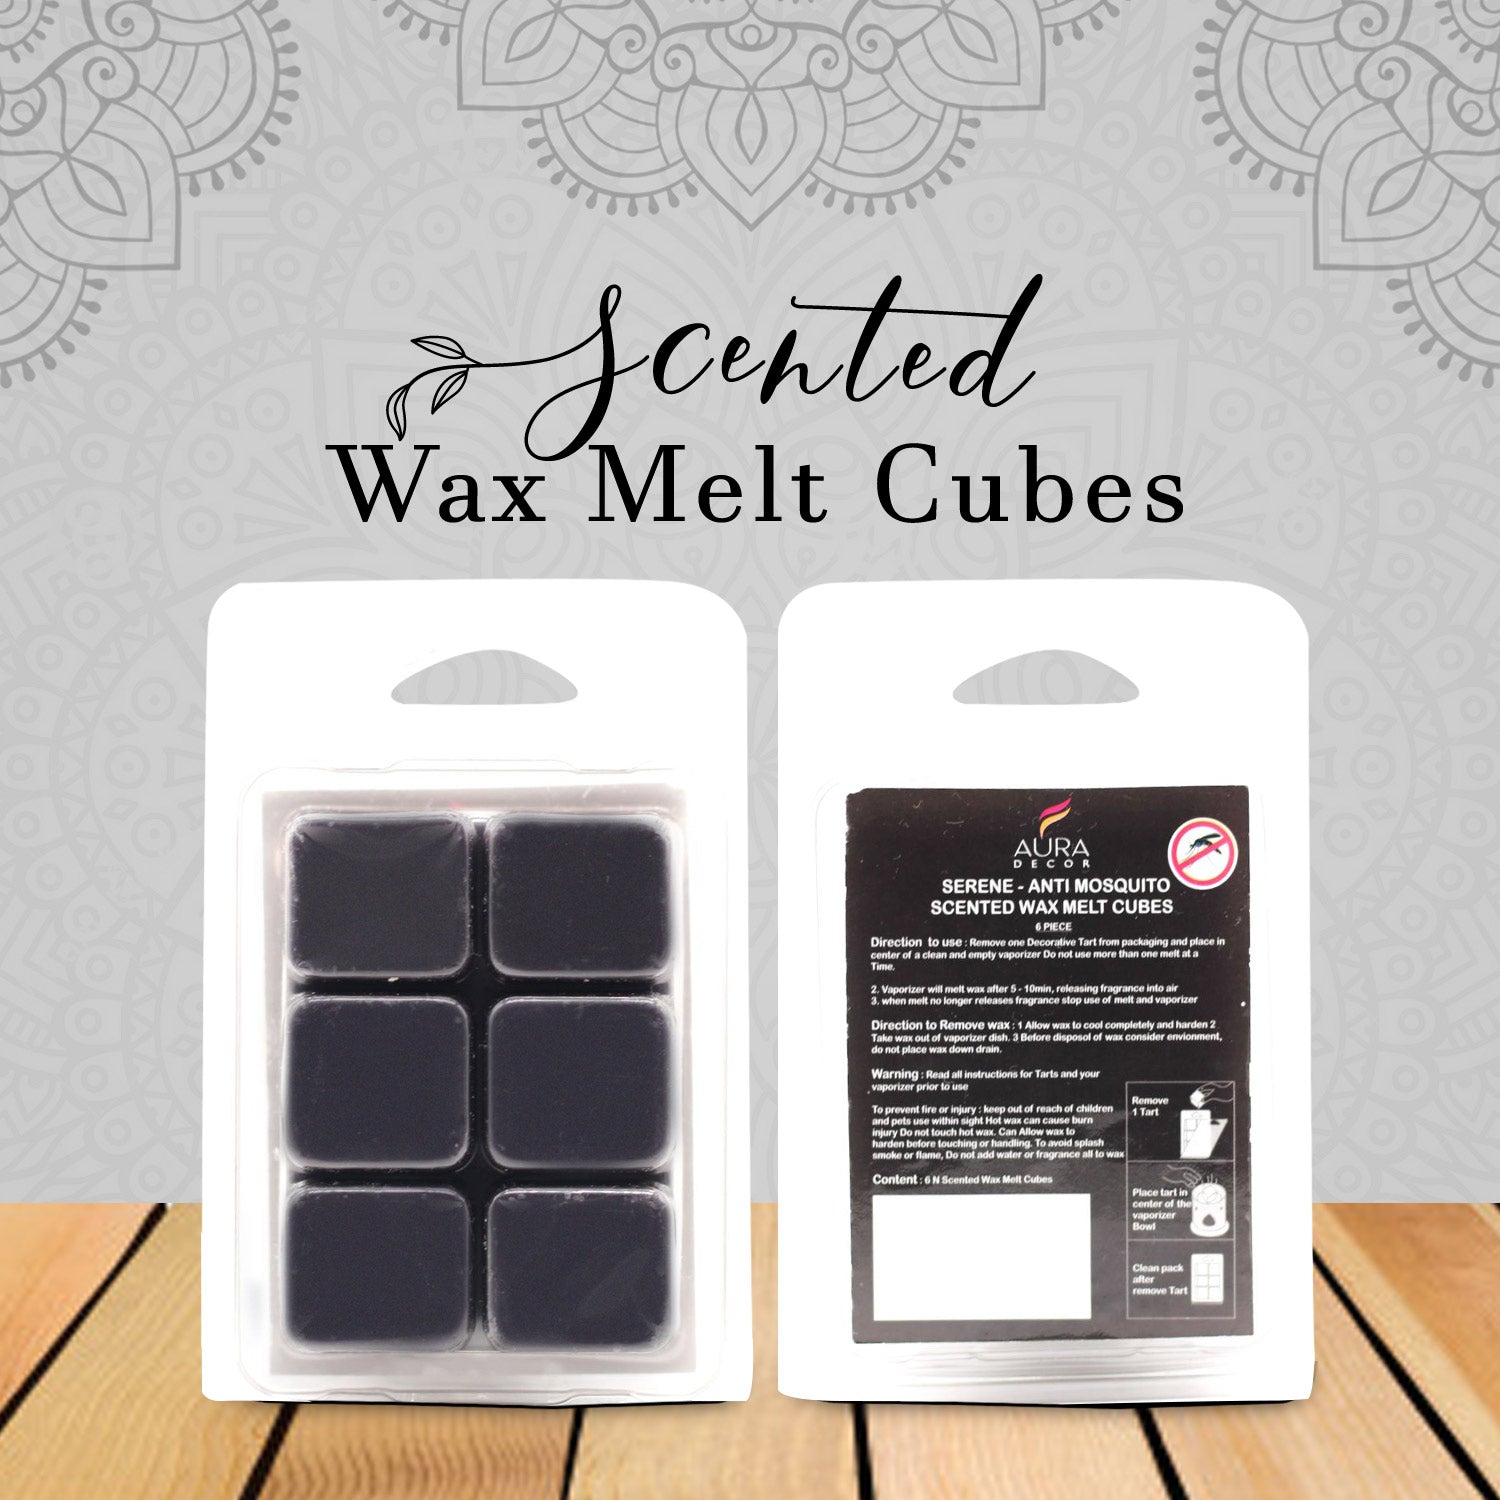 Eco-Luxury Scented 100% Coconut Best Wax Melts cubes natural for warmer